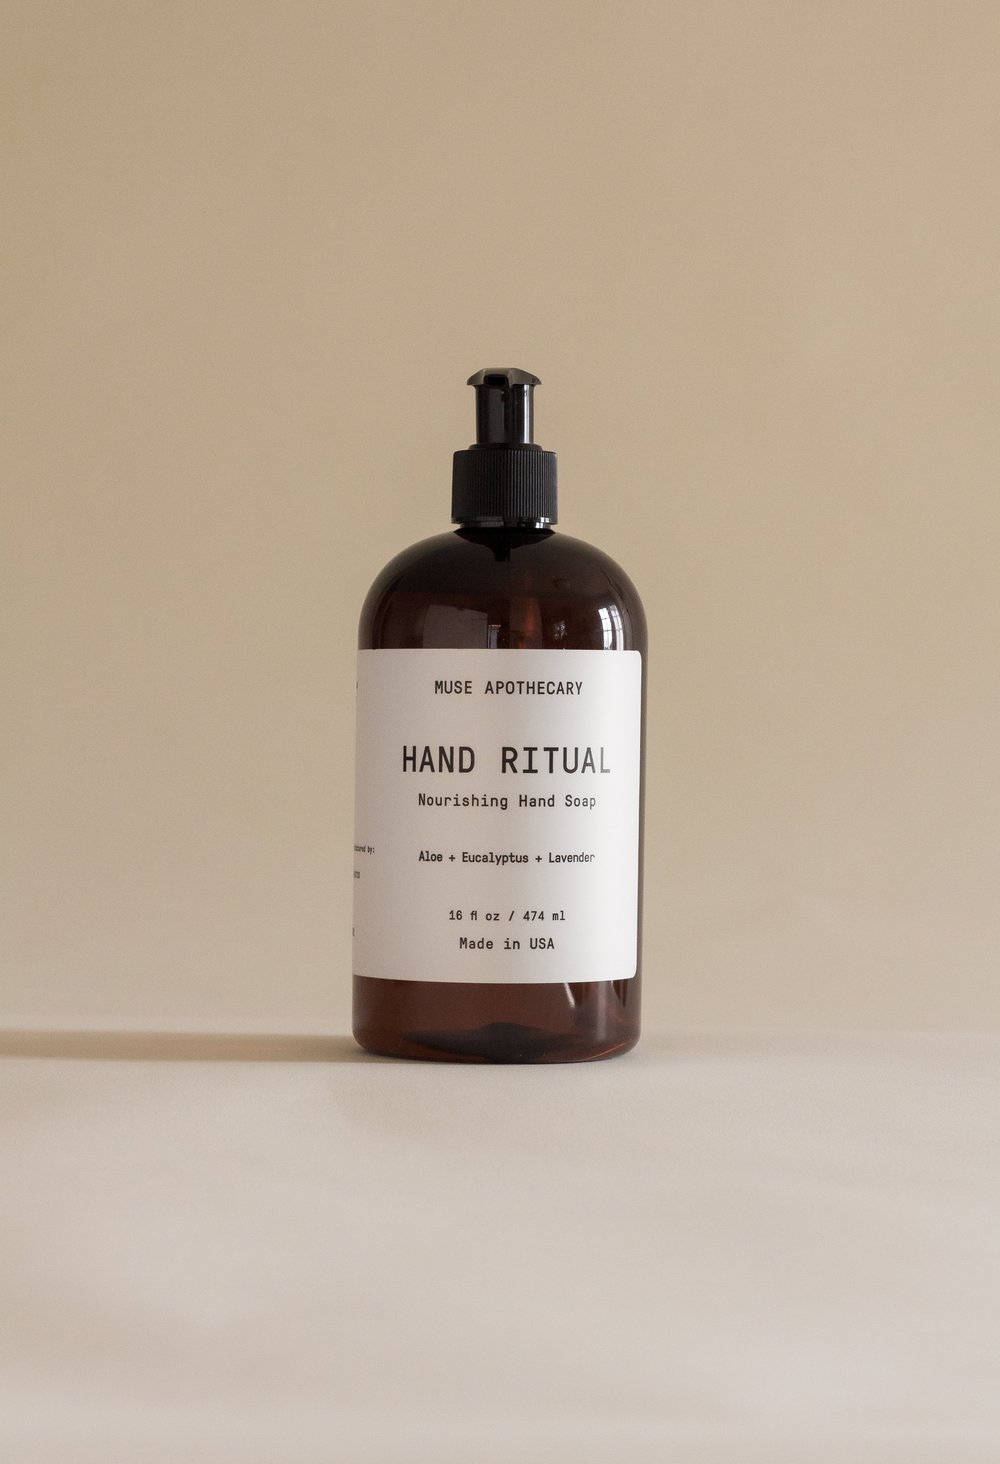 Muse Bath Apothecary Hand Ritual - Aromatic and Nourishing Hand Soap, Infused with Natural Aromatherapy Essential Oils - 16 oz, Coconut + Sandalwood